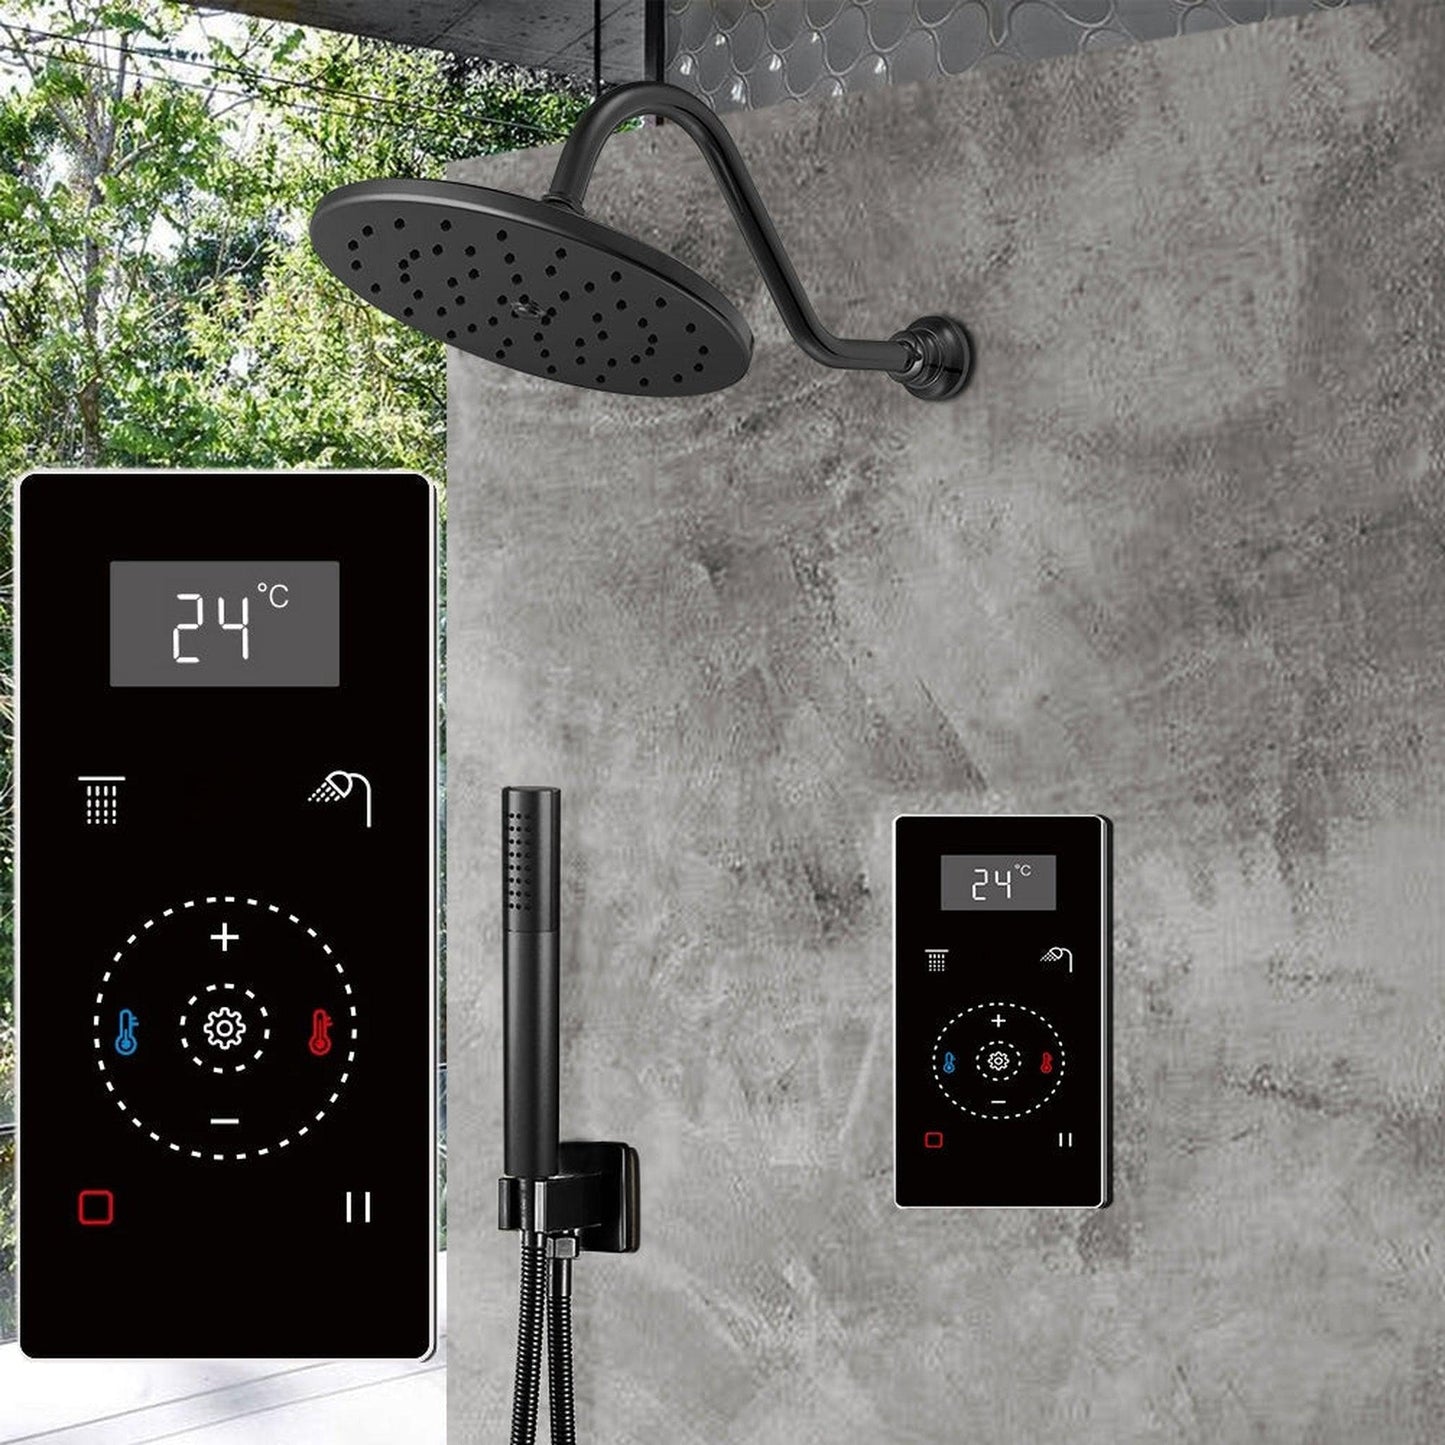 Fontana 10" Matte Black Round Wall-Mounted Automatic Thermostatic Shower With Black Digital Touch Screen Shower Mixer Display 2-Function Rainfall Shower Set With Hand Shower